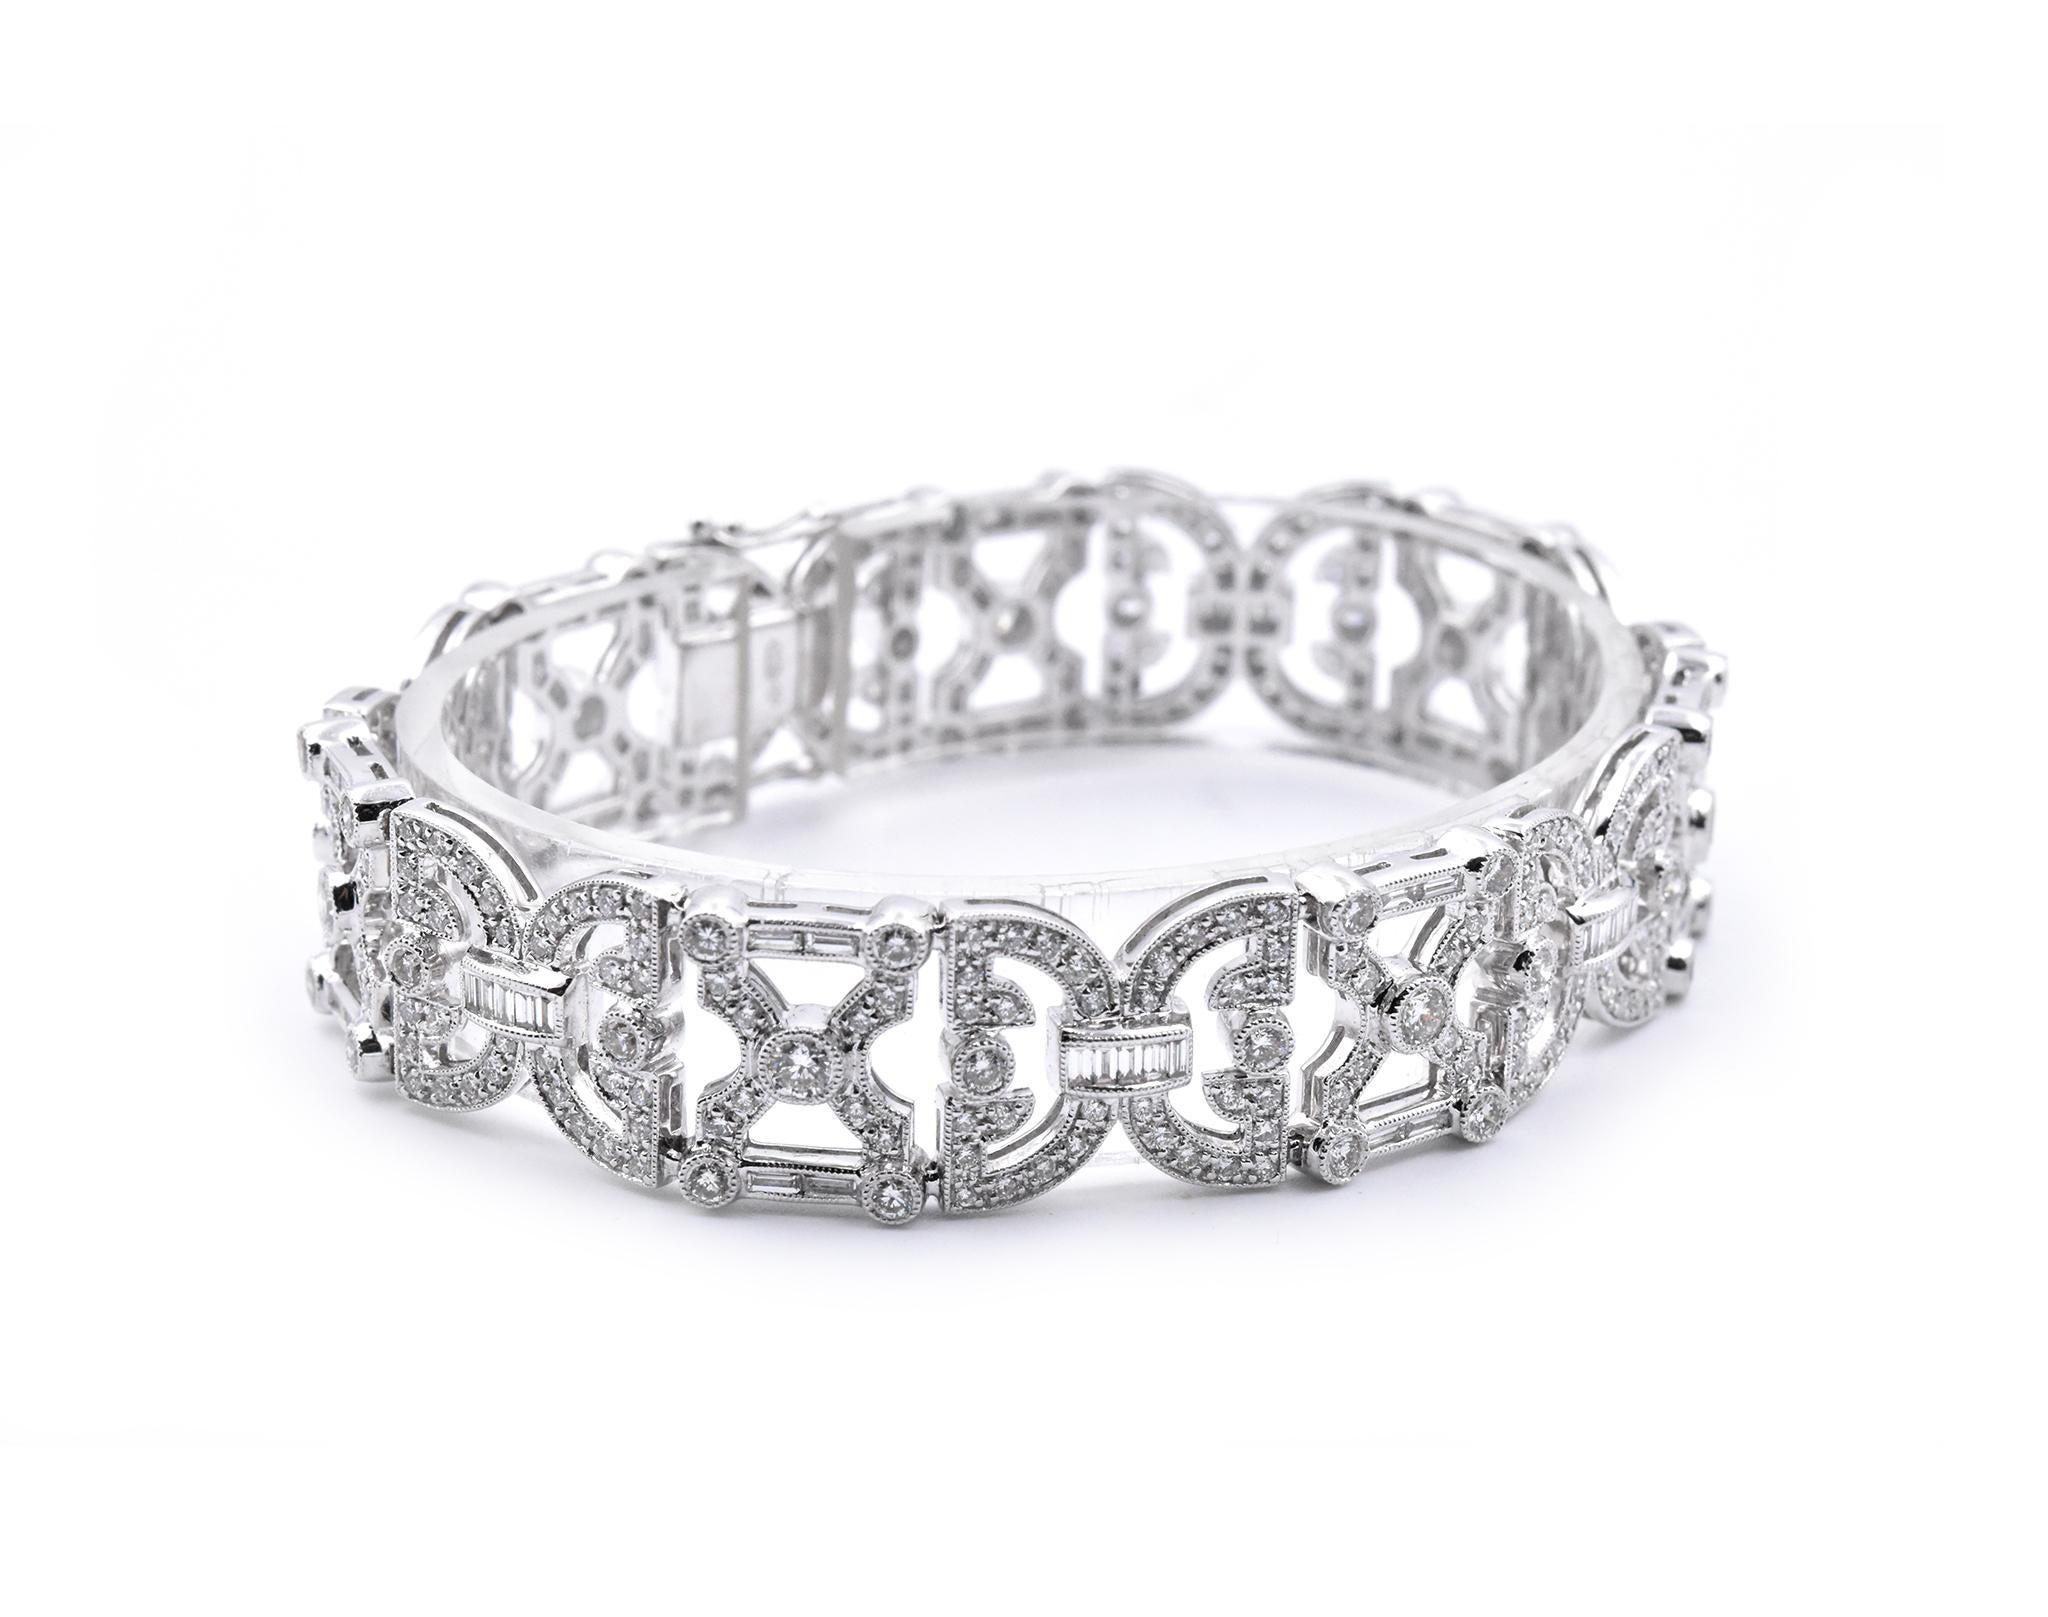 Material: 18k white gold
Diamonds: 392 baguette and round brilliant cuts = 5.31cttw
Color: H
Clarity: VS2-SI1
Dimensions: bracelet measures 7-inches in length
Weight: 35.70 grams
